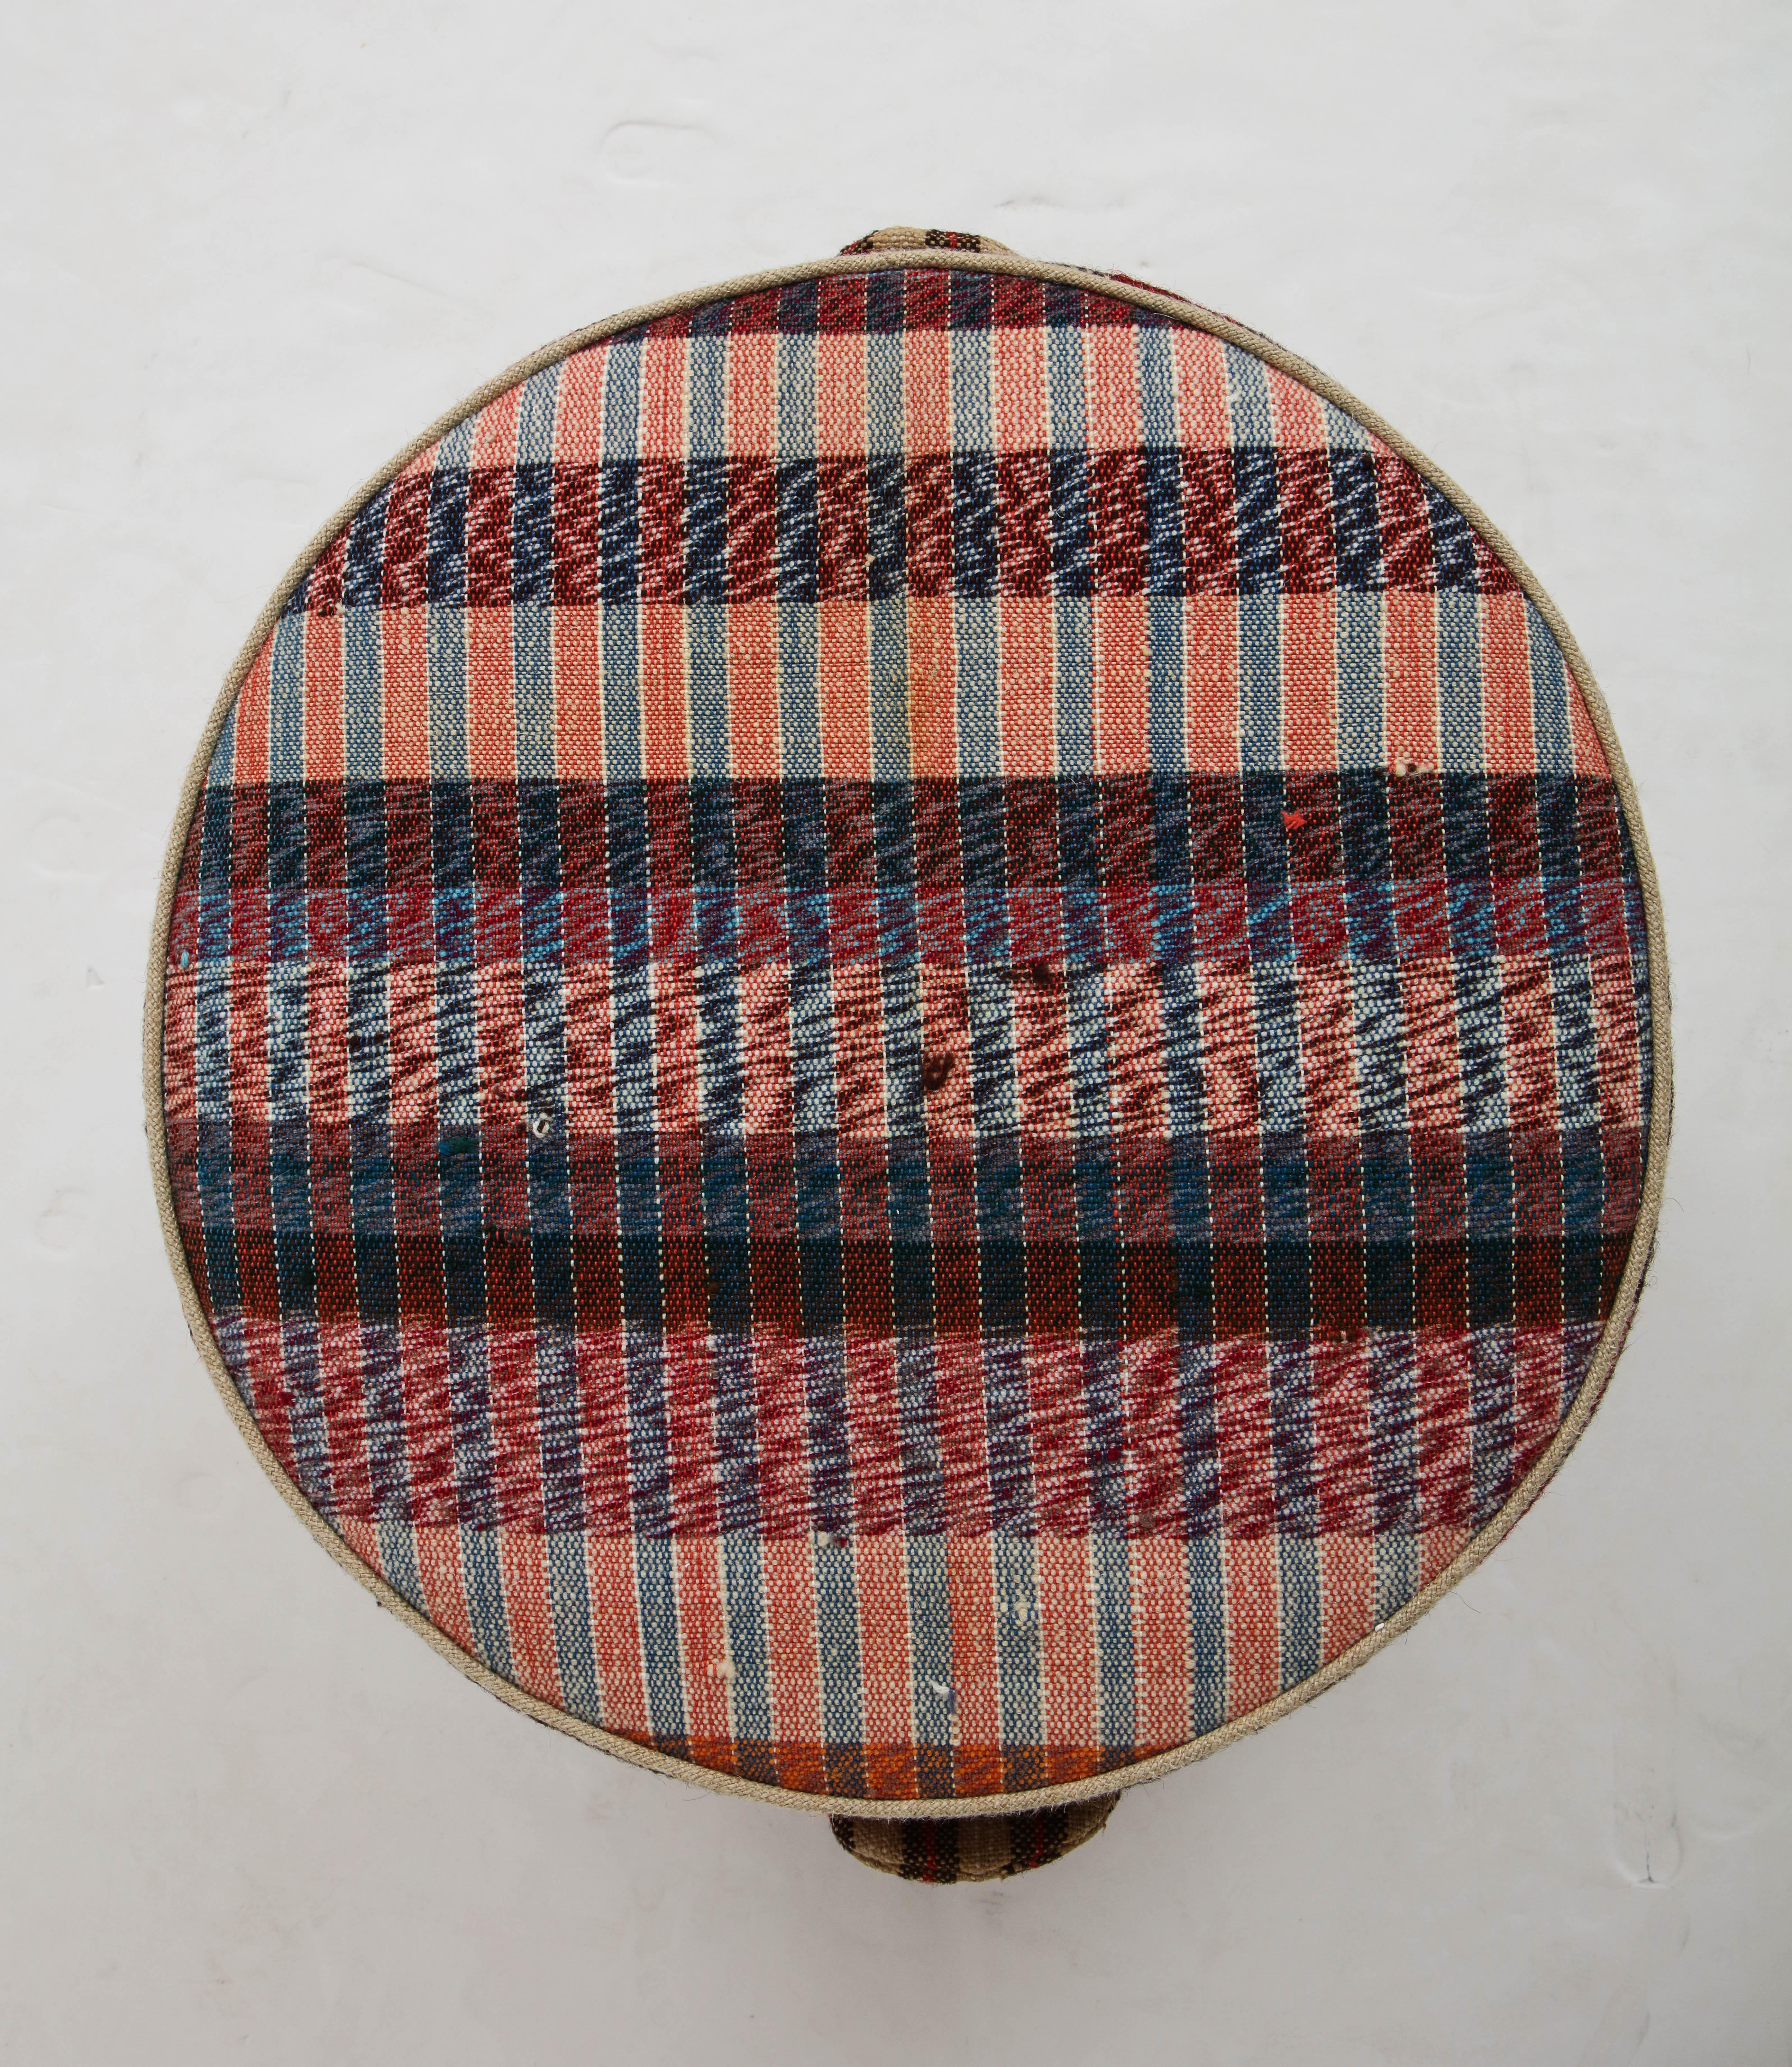 American Nickey Kehoe Collection Small Round Hassock in Vintage Plaid Fabric